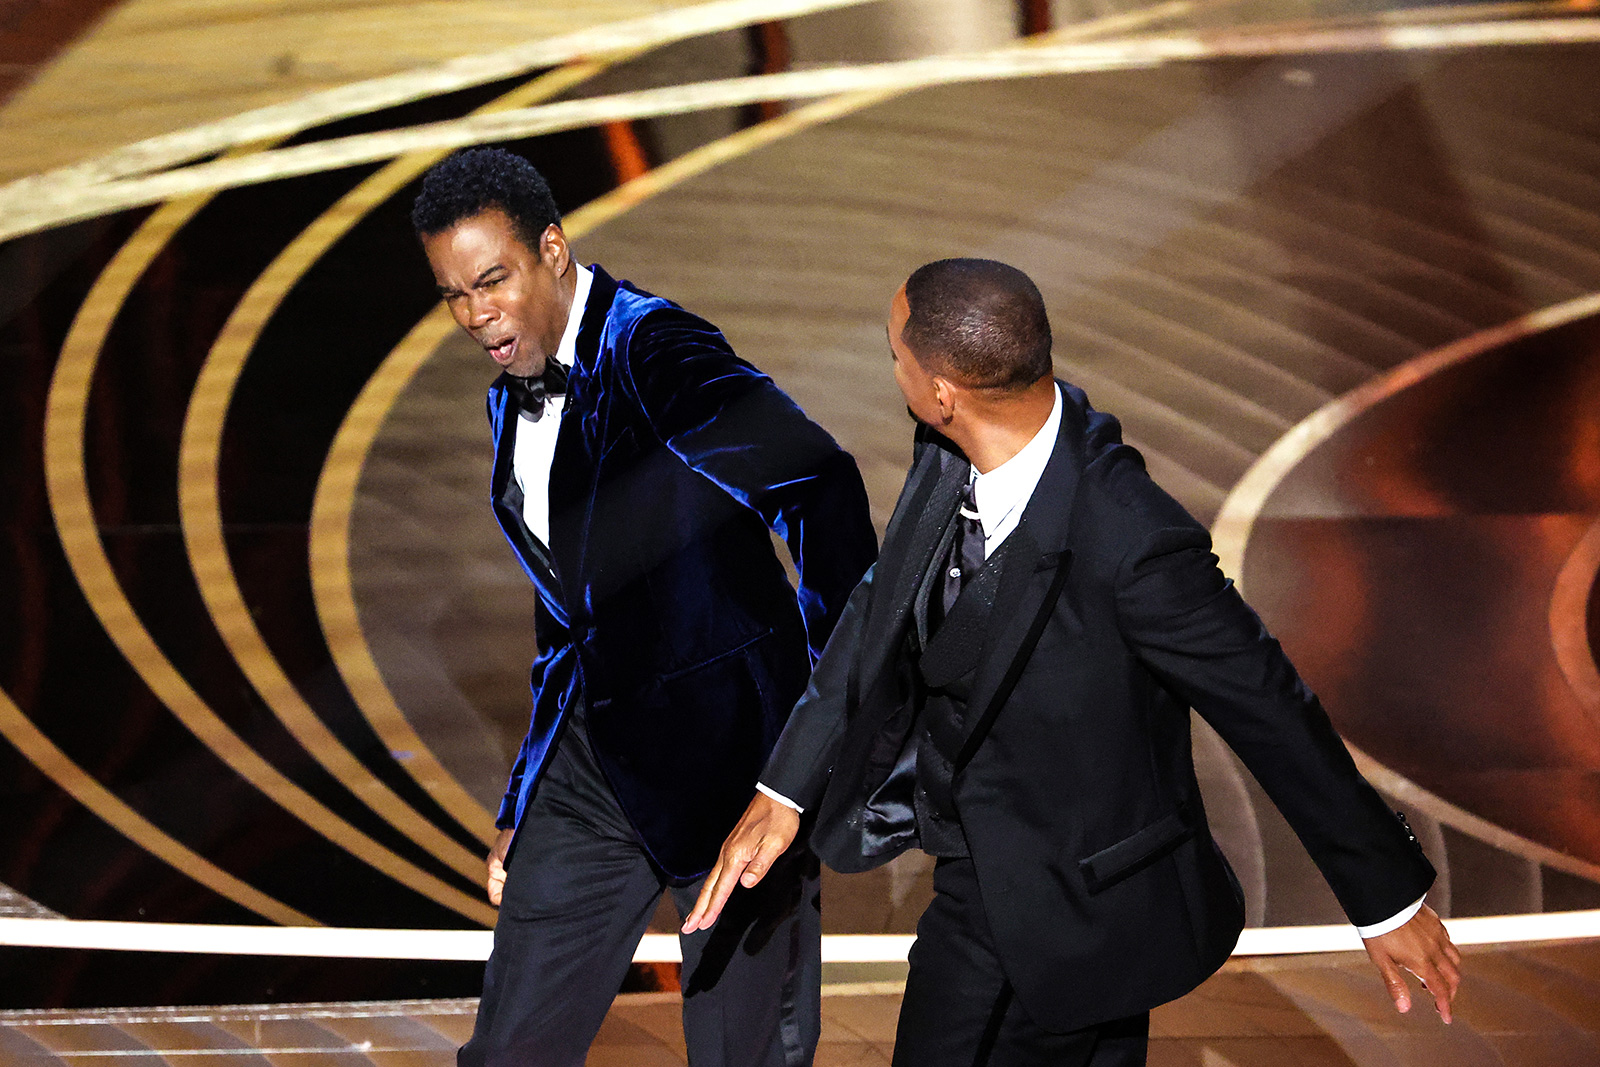 Photos that defined 2022: Will Smith slaps Chris Rock